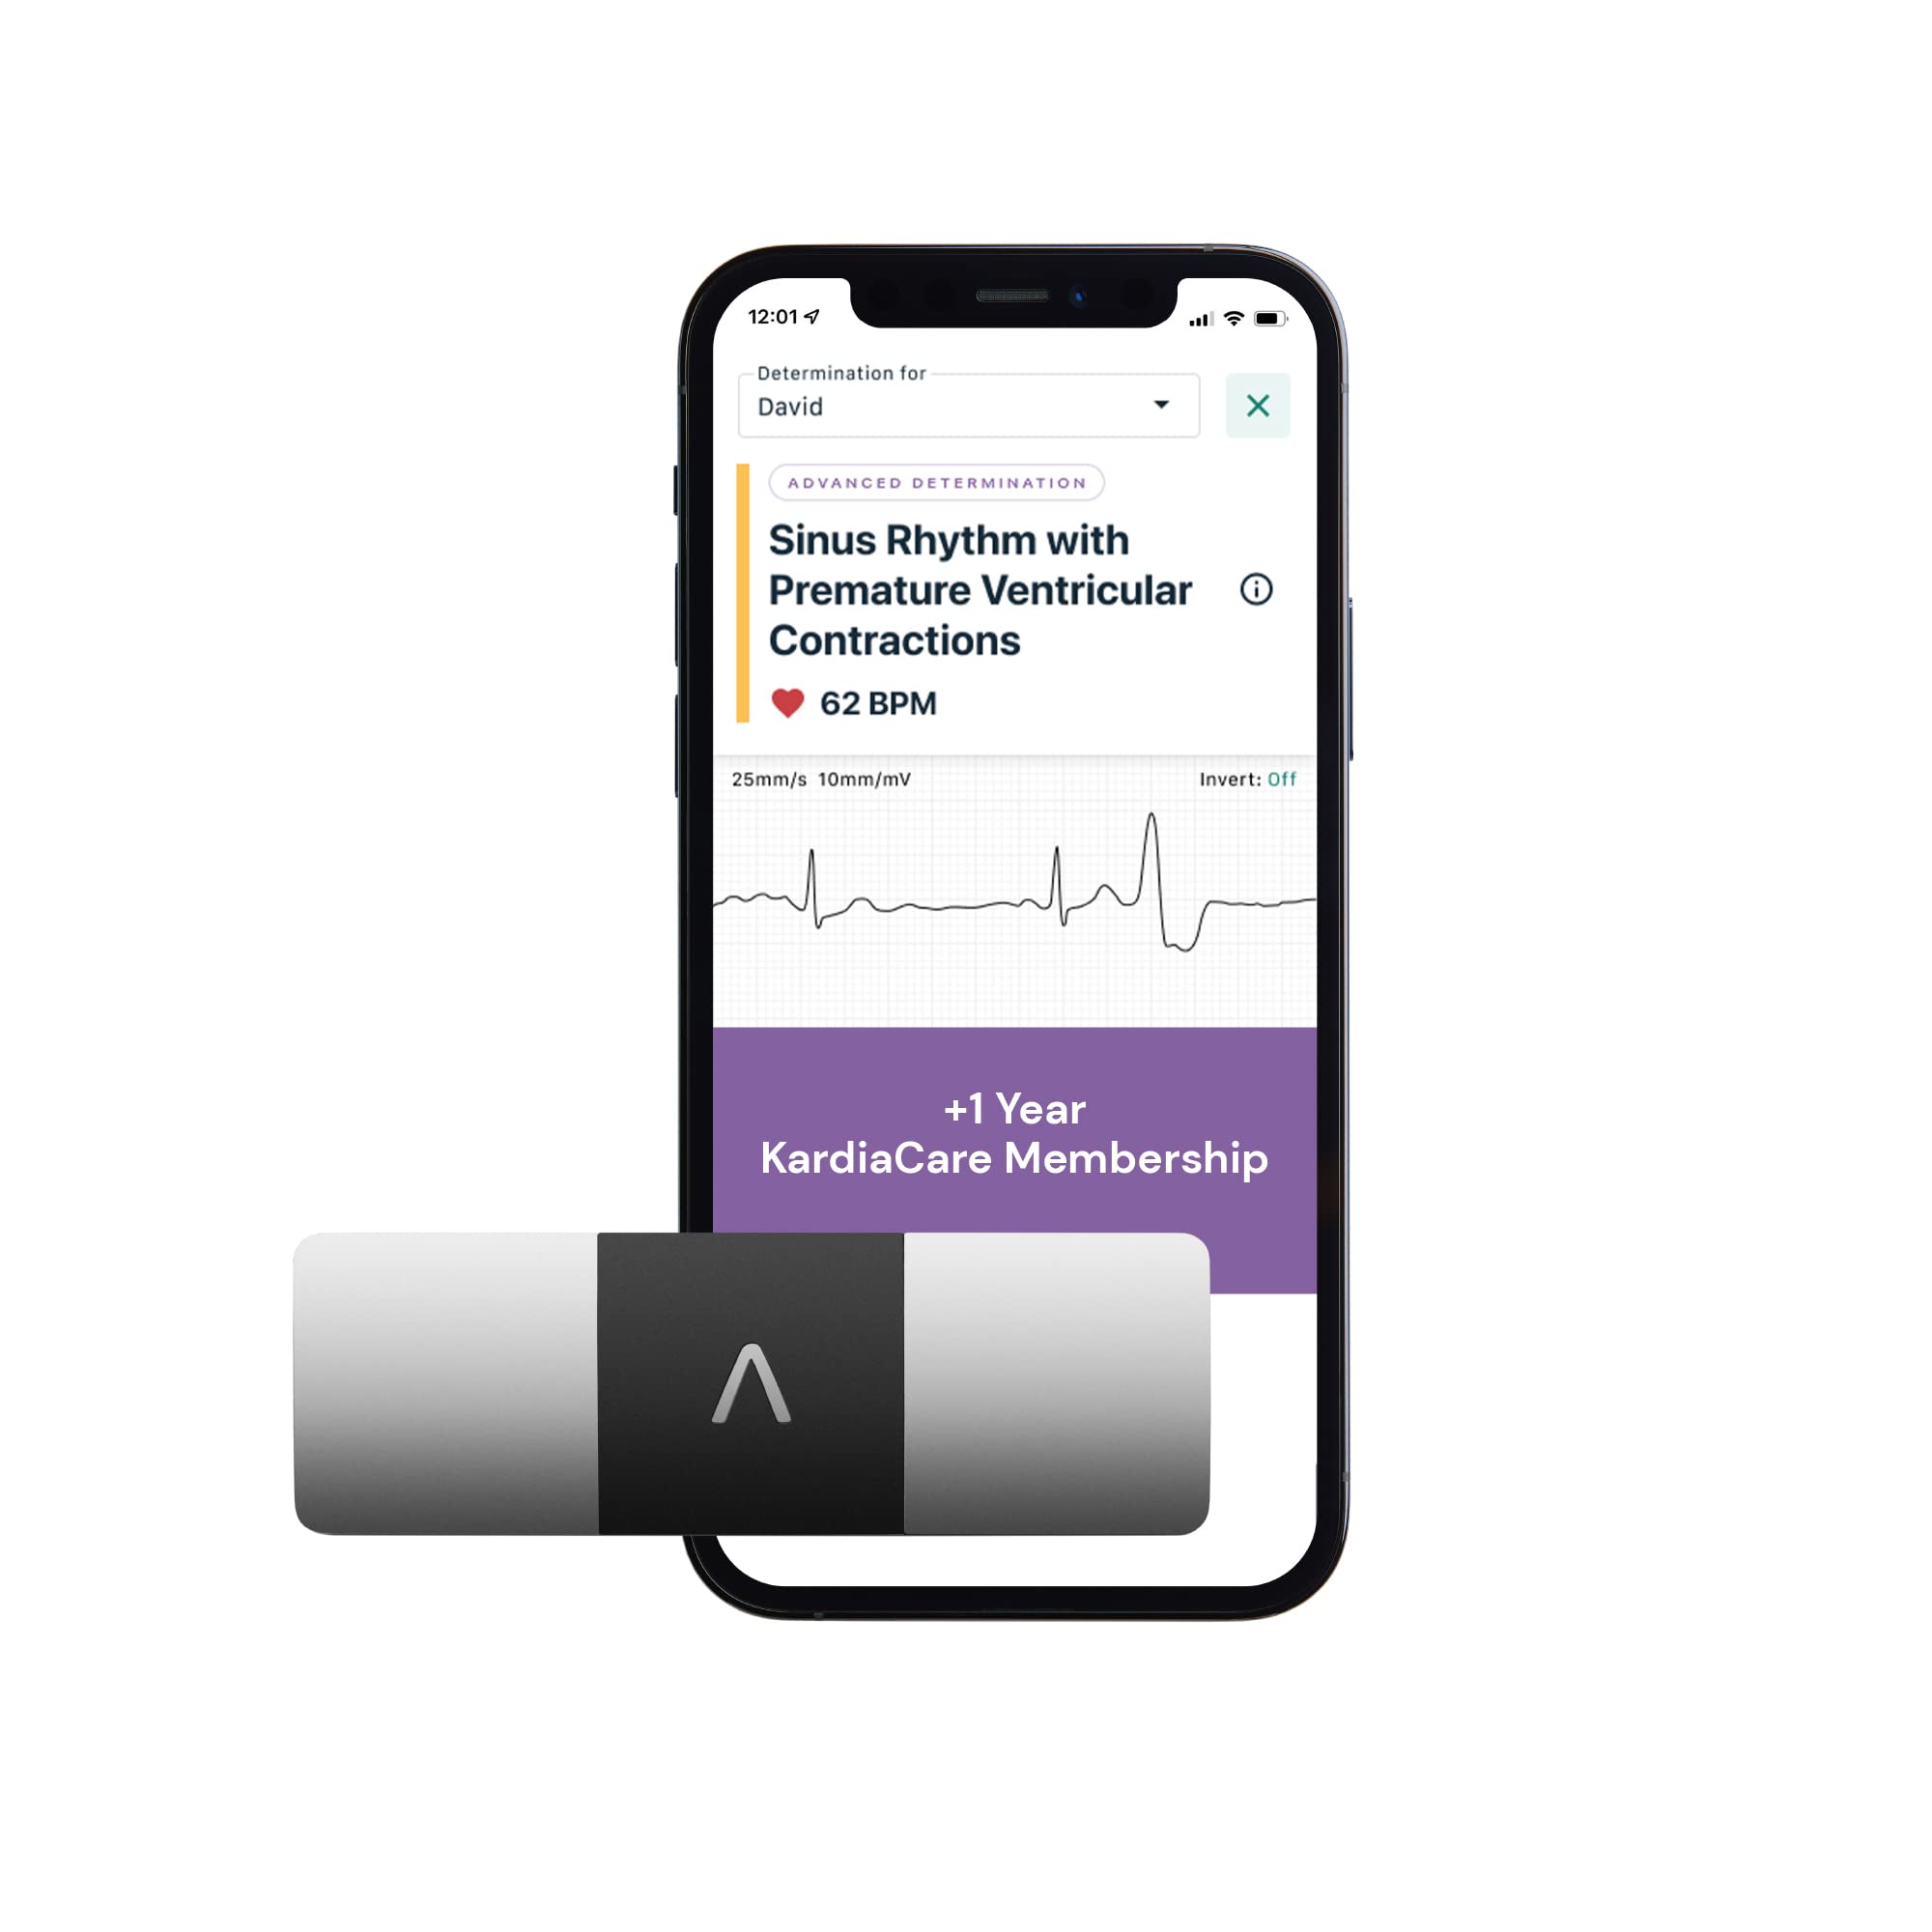 AliveCor KardiaMobile 6L is a 6 channel ECG in pocket size